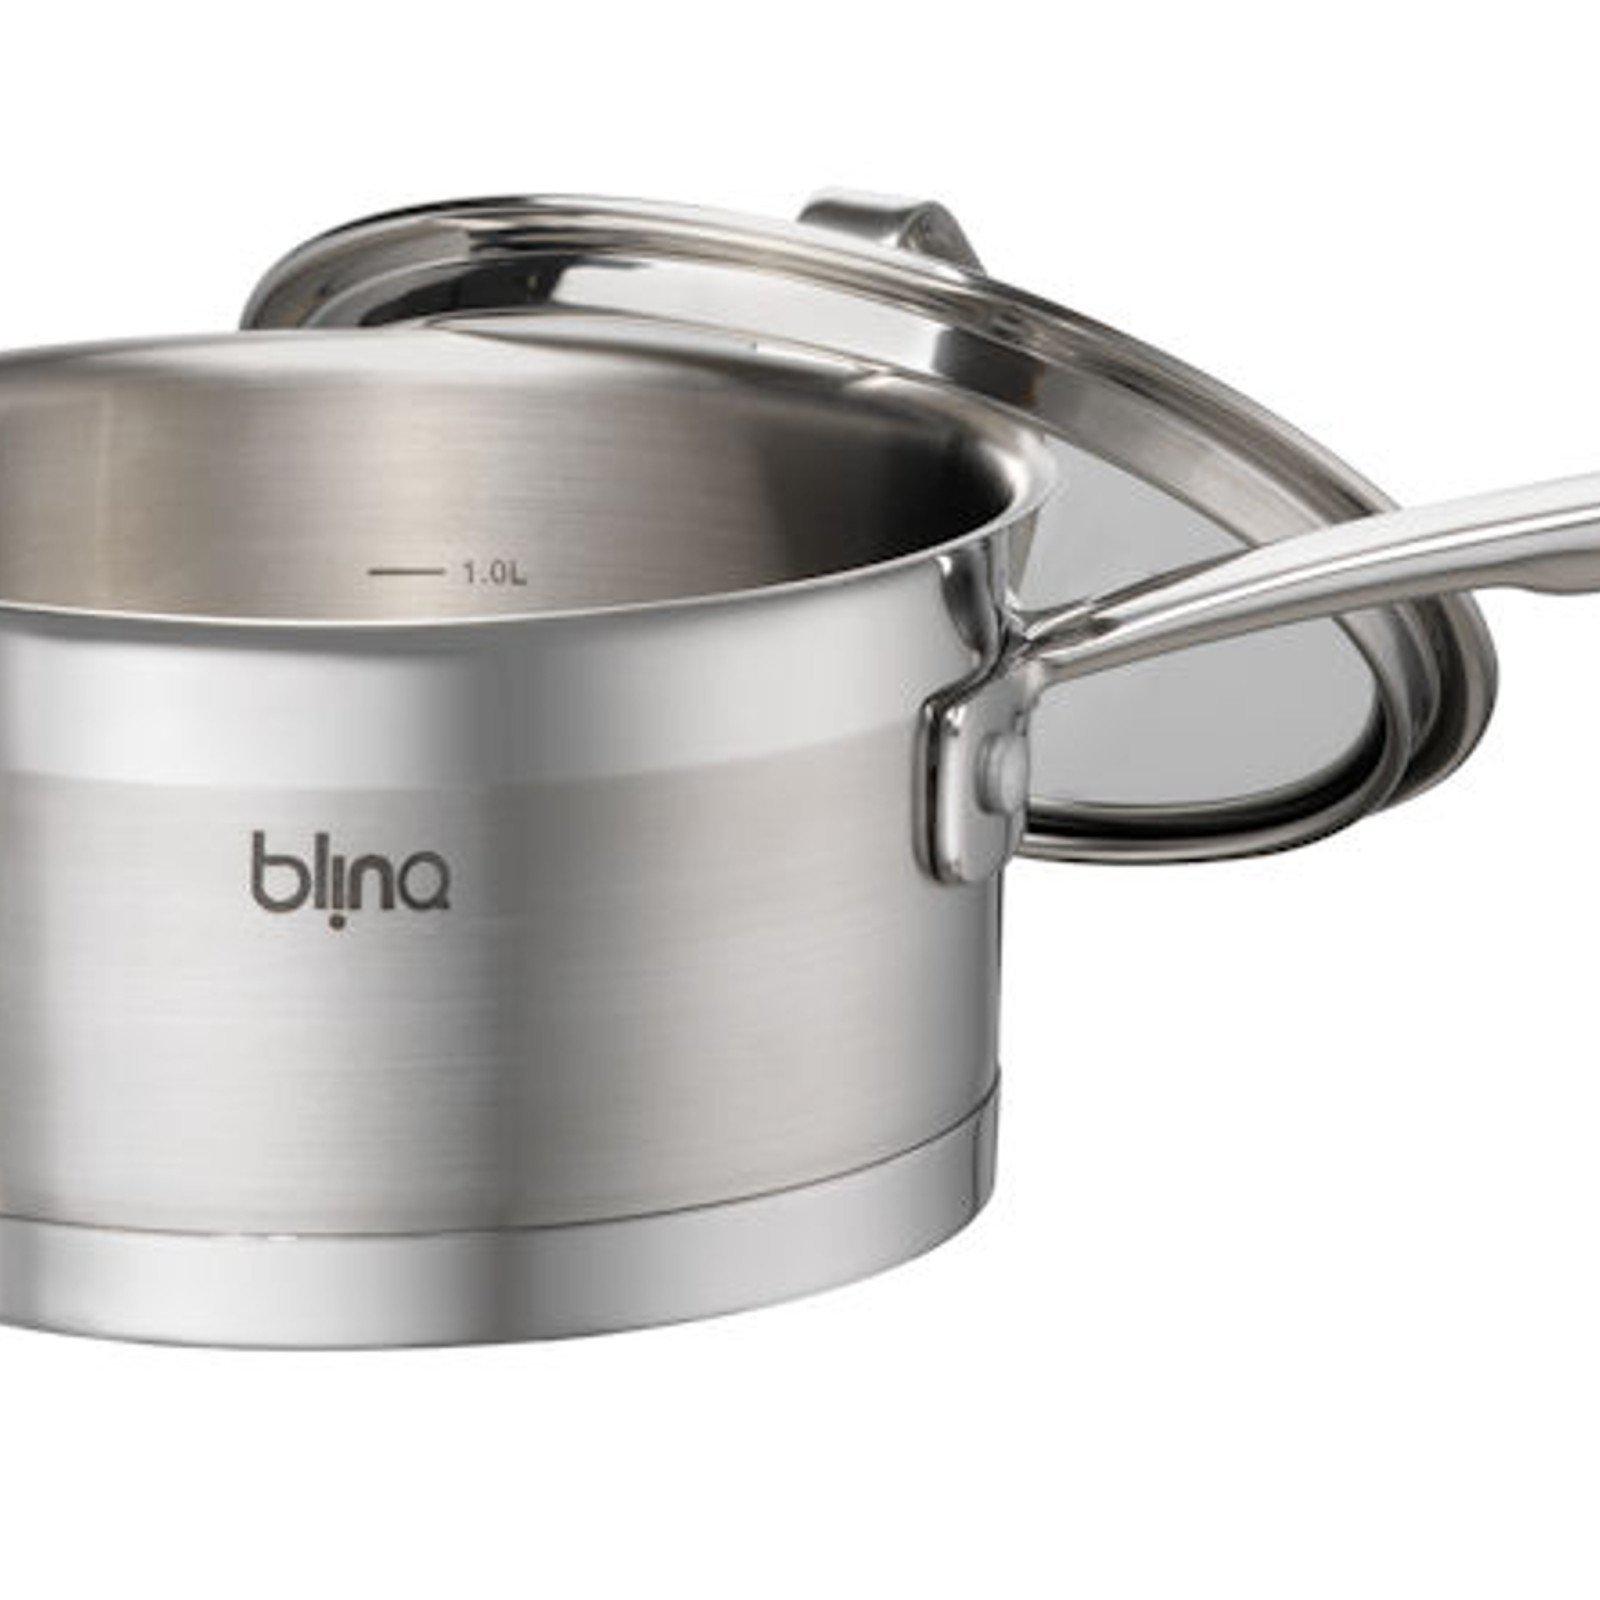 Blinq Gourmet Saucepan - 16 cm / 1.6 Litre Induction Compatible Saucepan with Lid-Stainless Steel Cookware-Chef's Quality Cookware